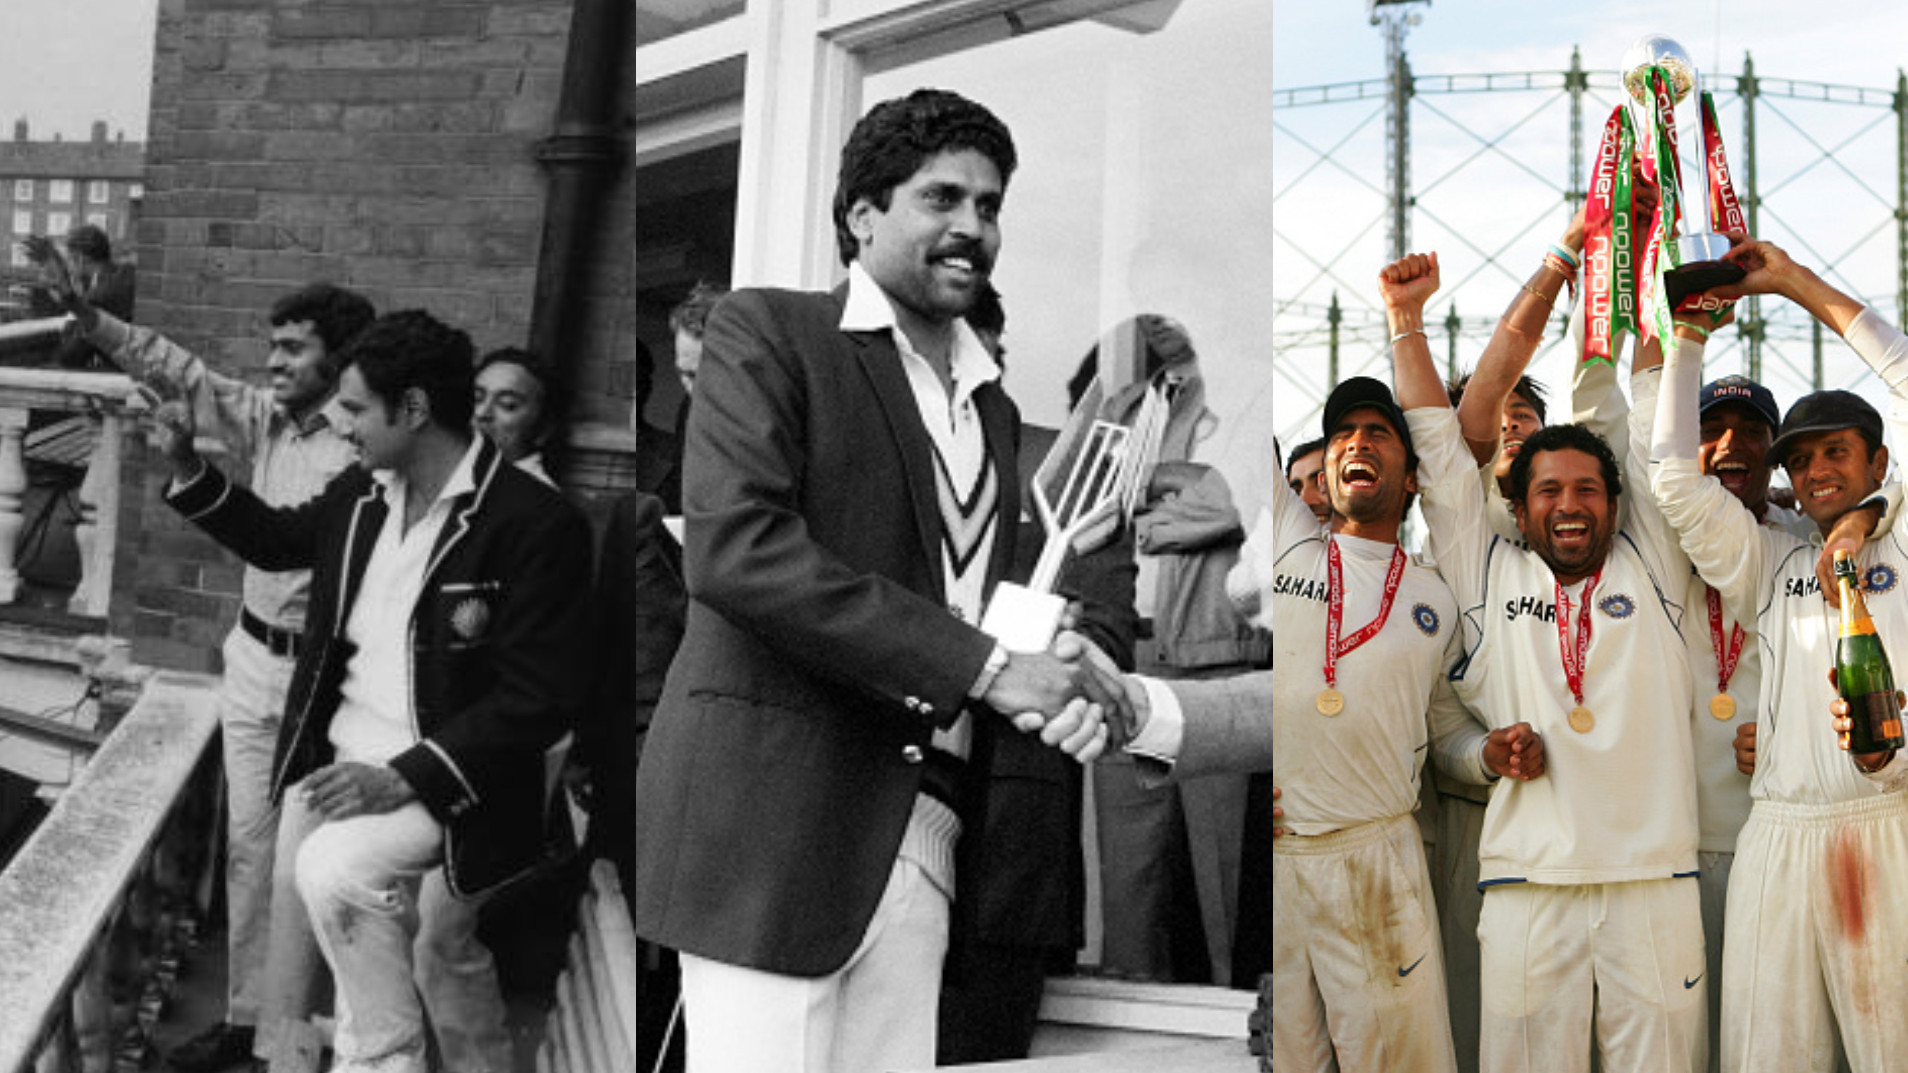 The tale of Team India’s three Test series wins in England